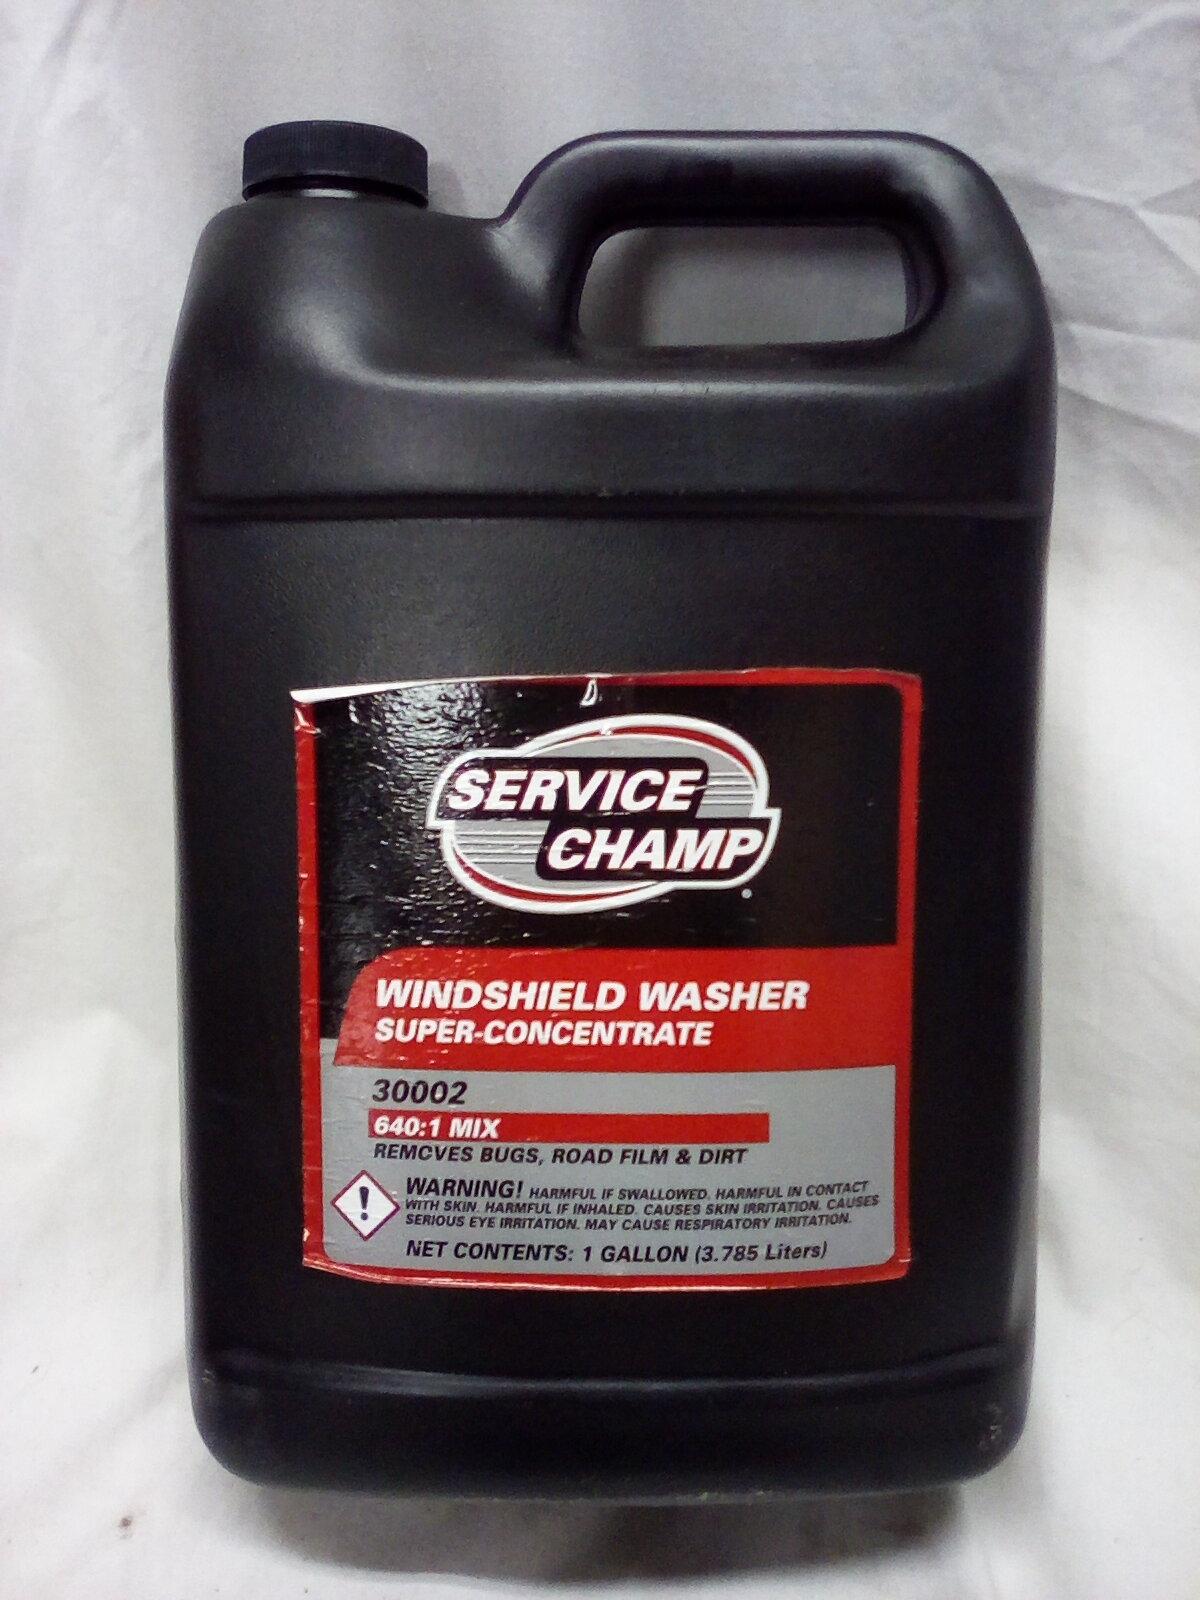 Single Gallon of Service Champ 640:1 Windshield Washer Super-Concentrate